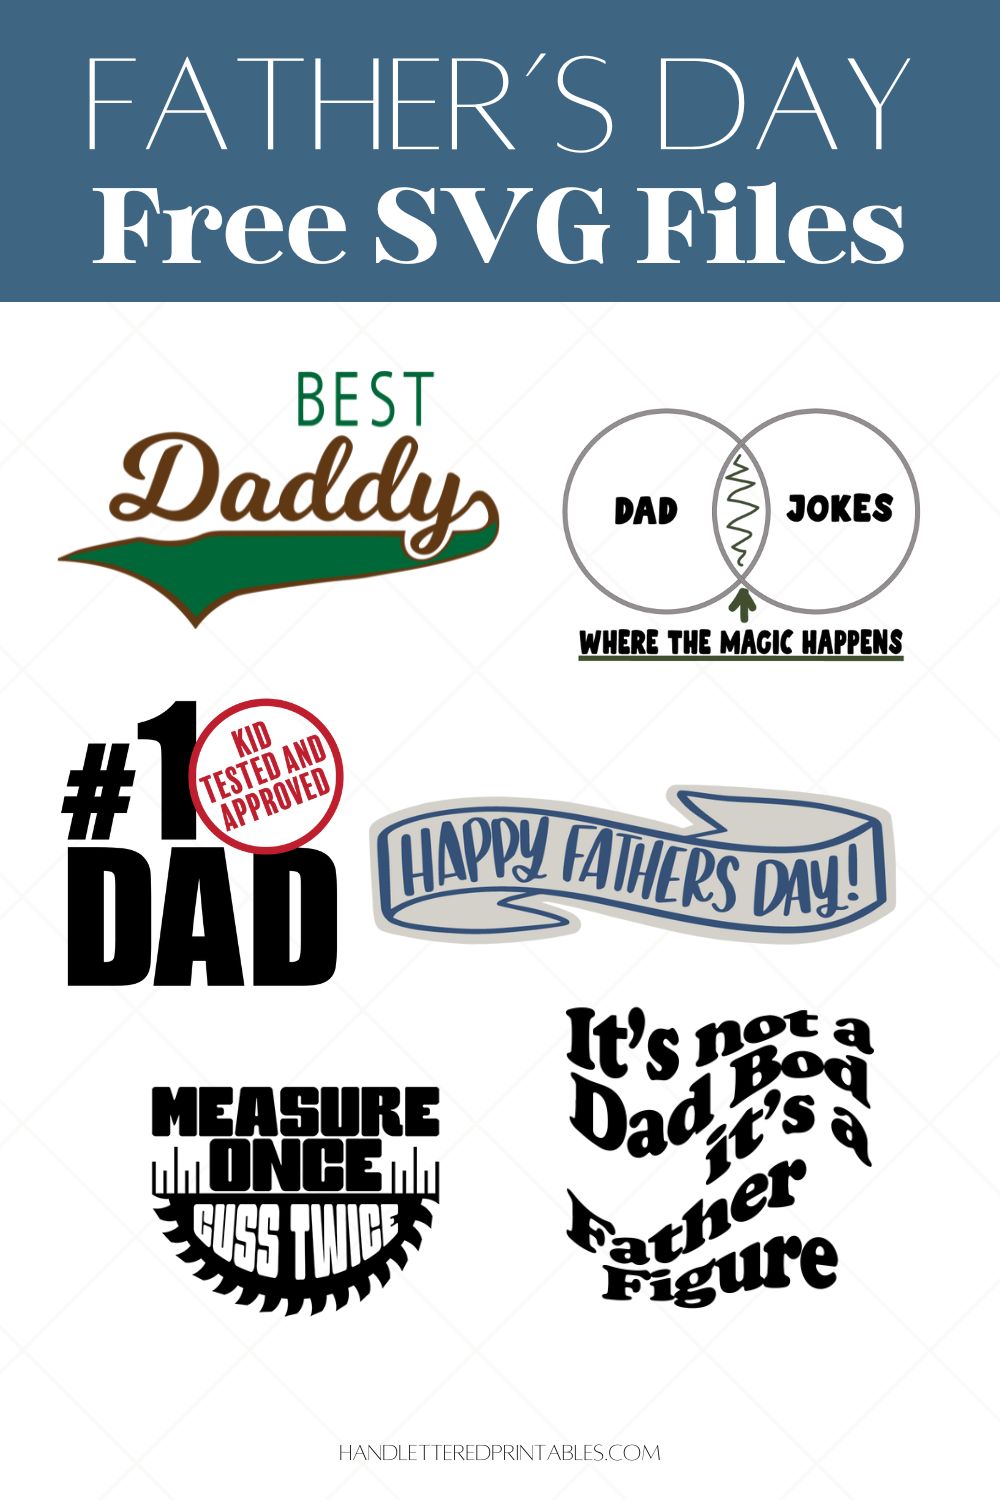 Title reads: Father's Day Free SVG Files Image is a collage of the free files